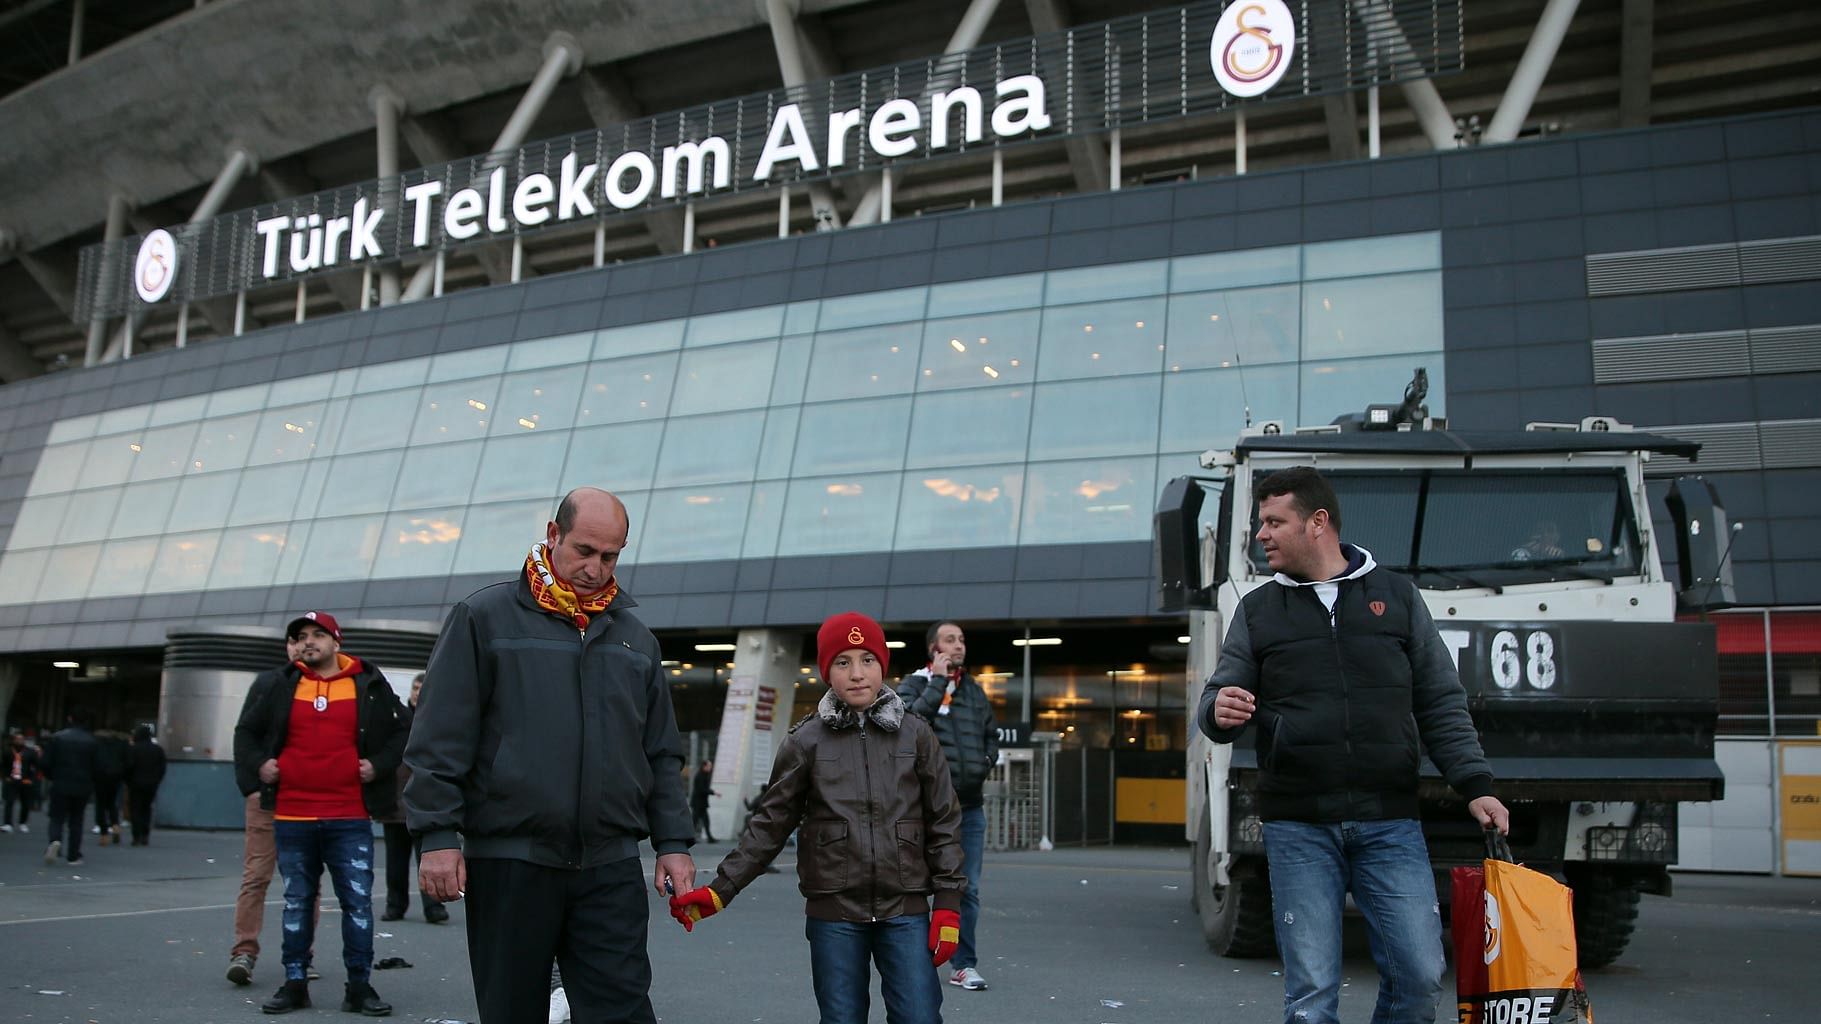 Disappointed soccer fans leave Galatasaray’s Turk Telekom Arena Stadium two hours before high-profile soccer match between two major Turkish teams, Istanbul. (Photo: AP)